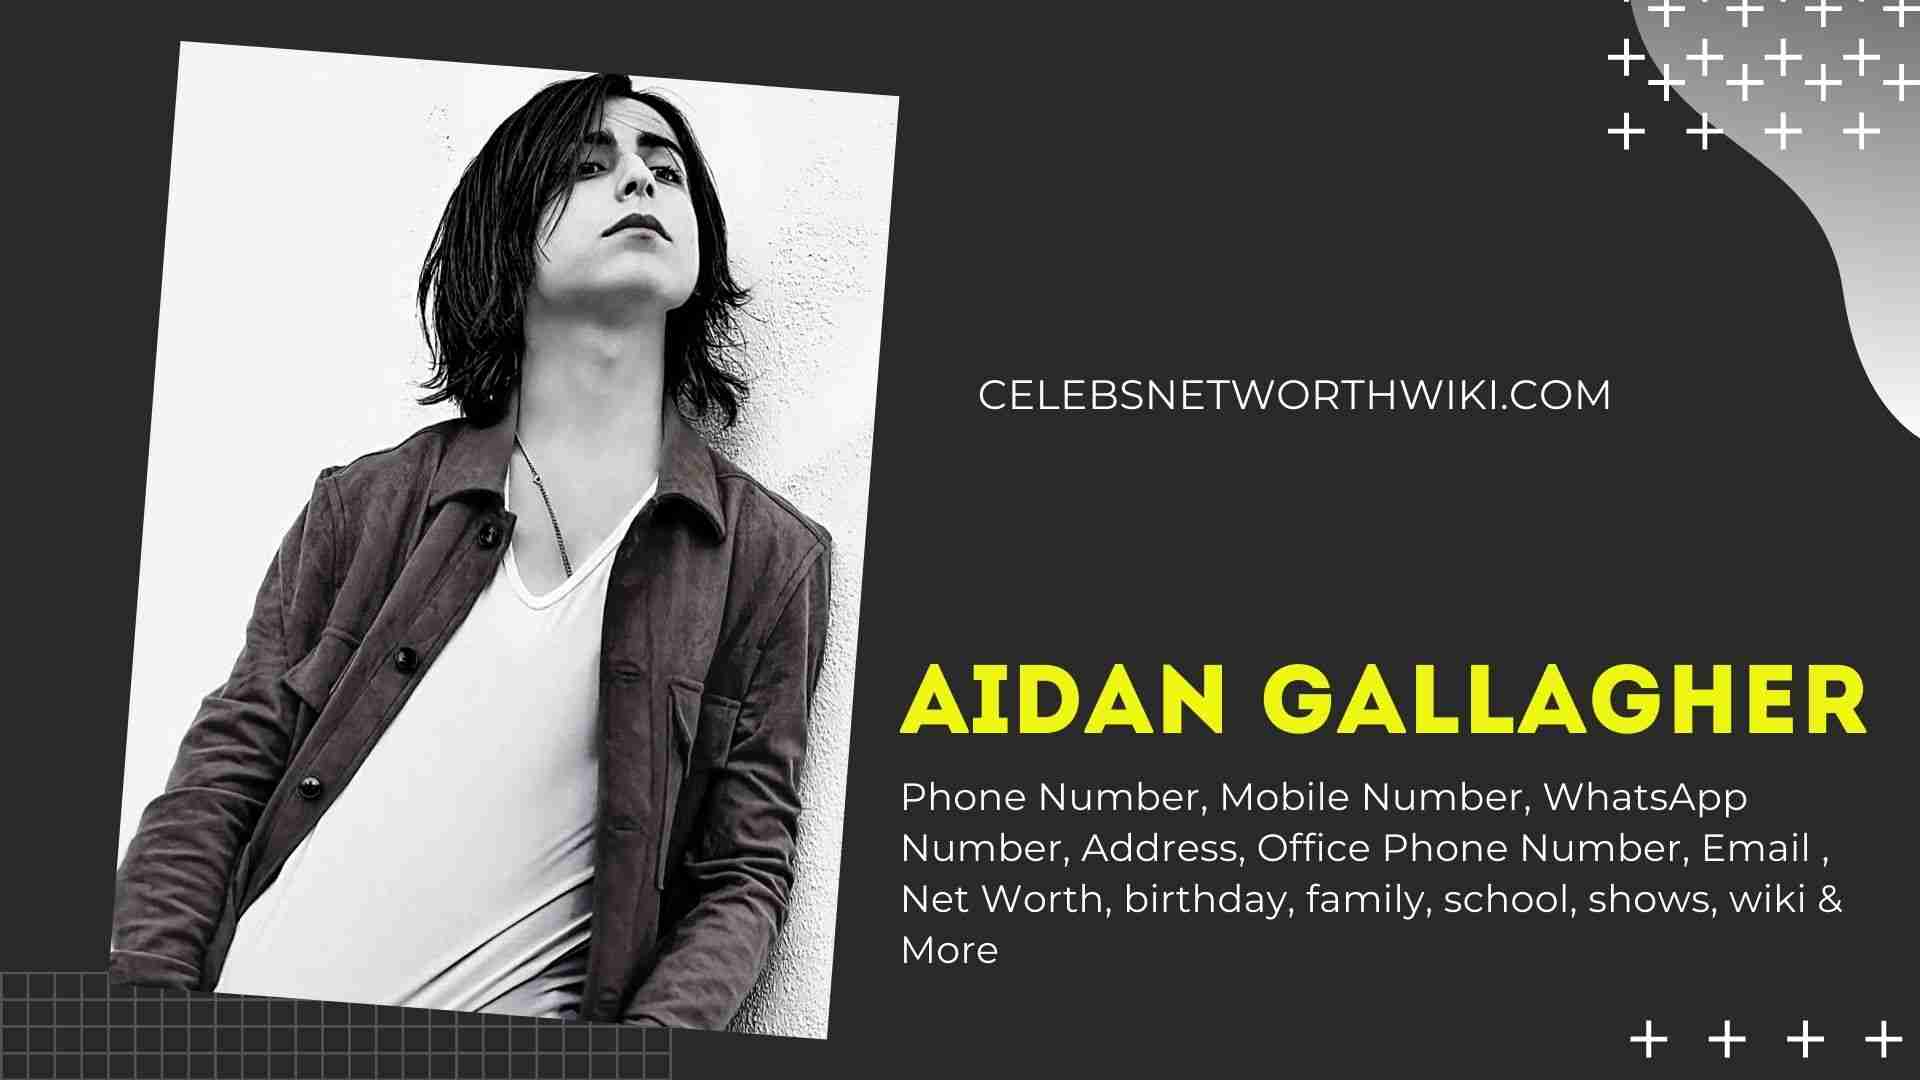 Aidan Gallagher Phone Number Texting Number, Contact Number, Mobile Number,...